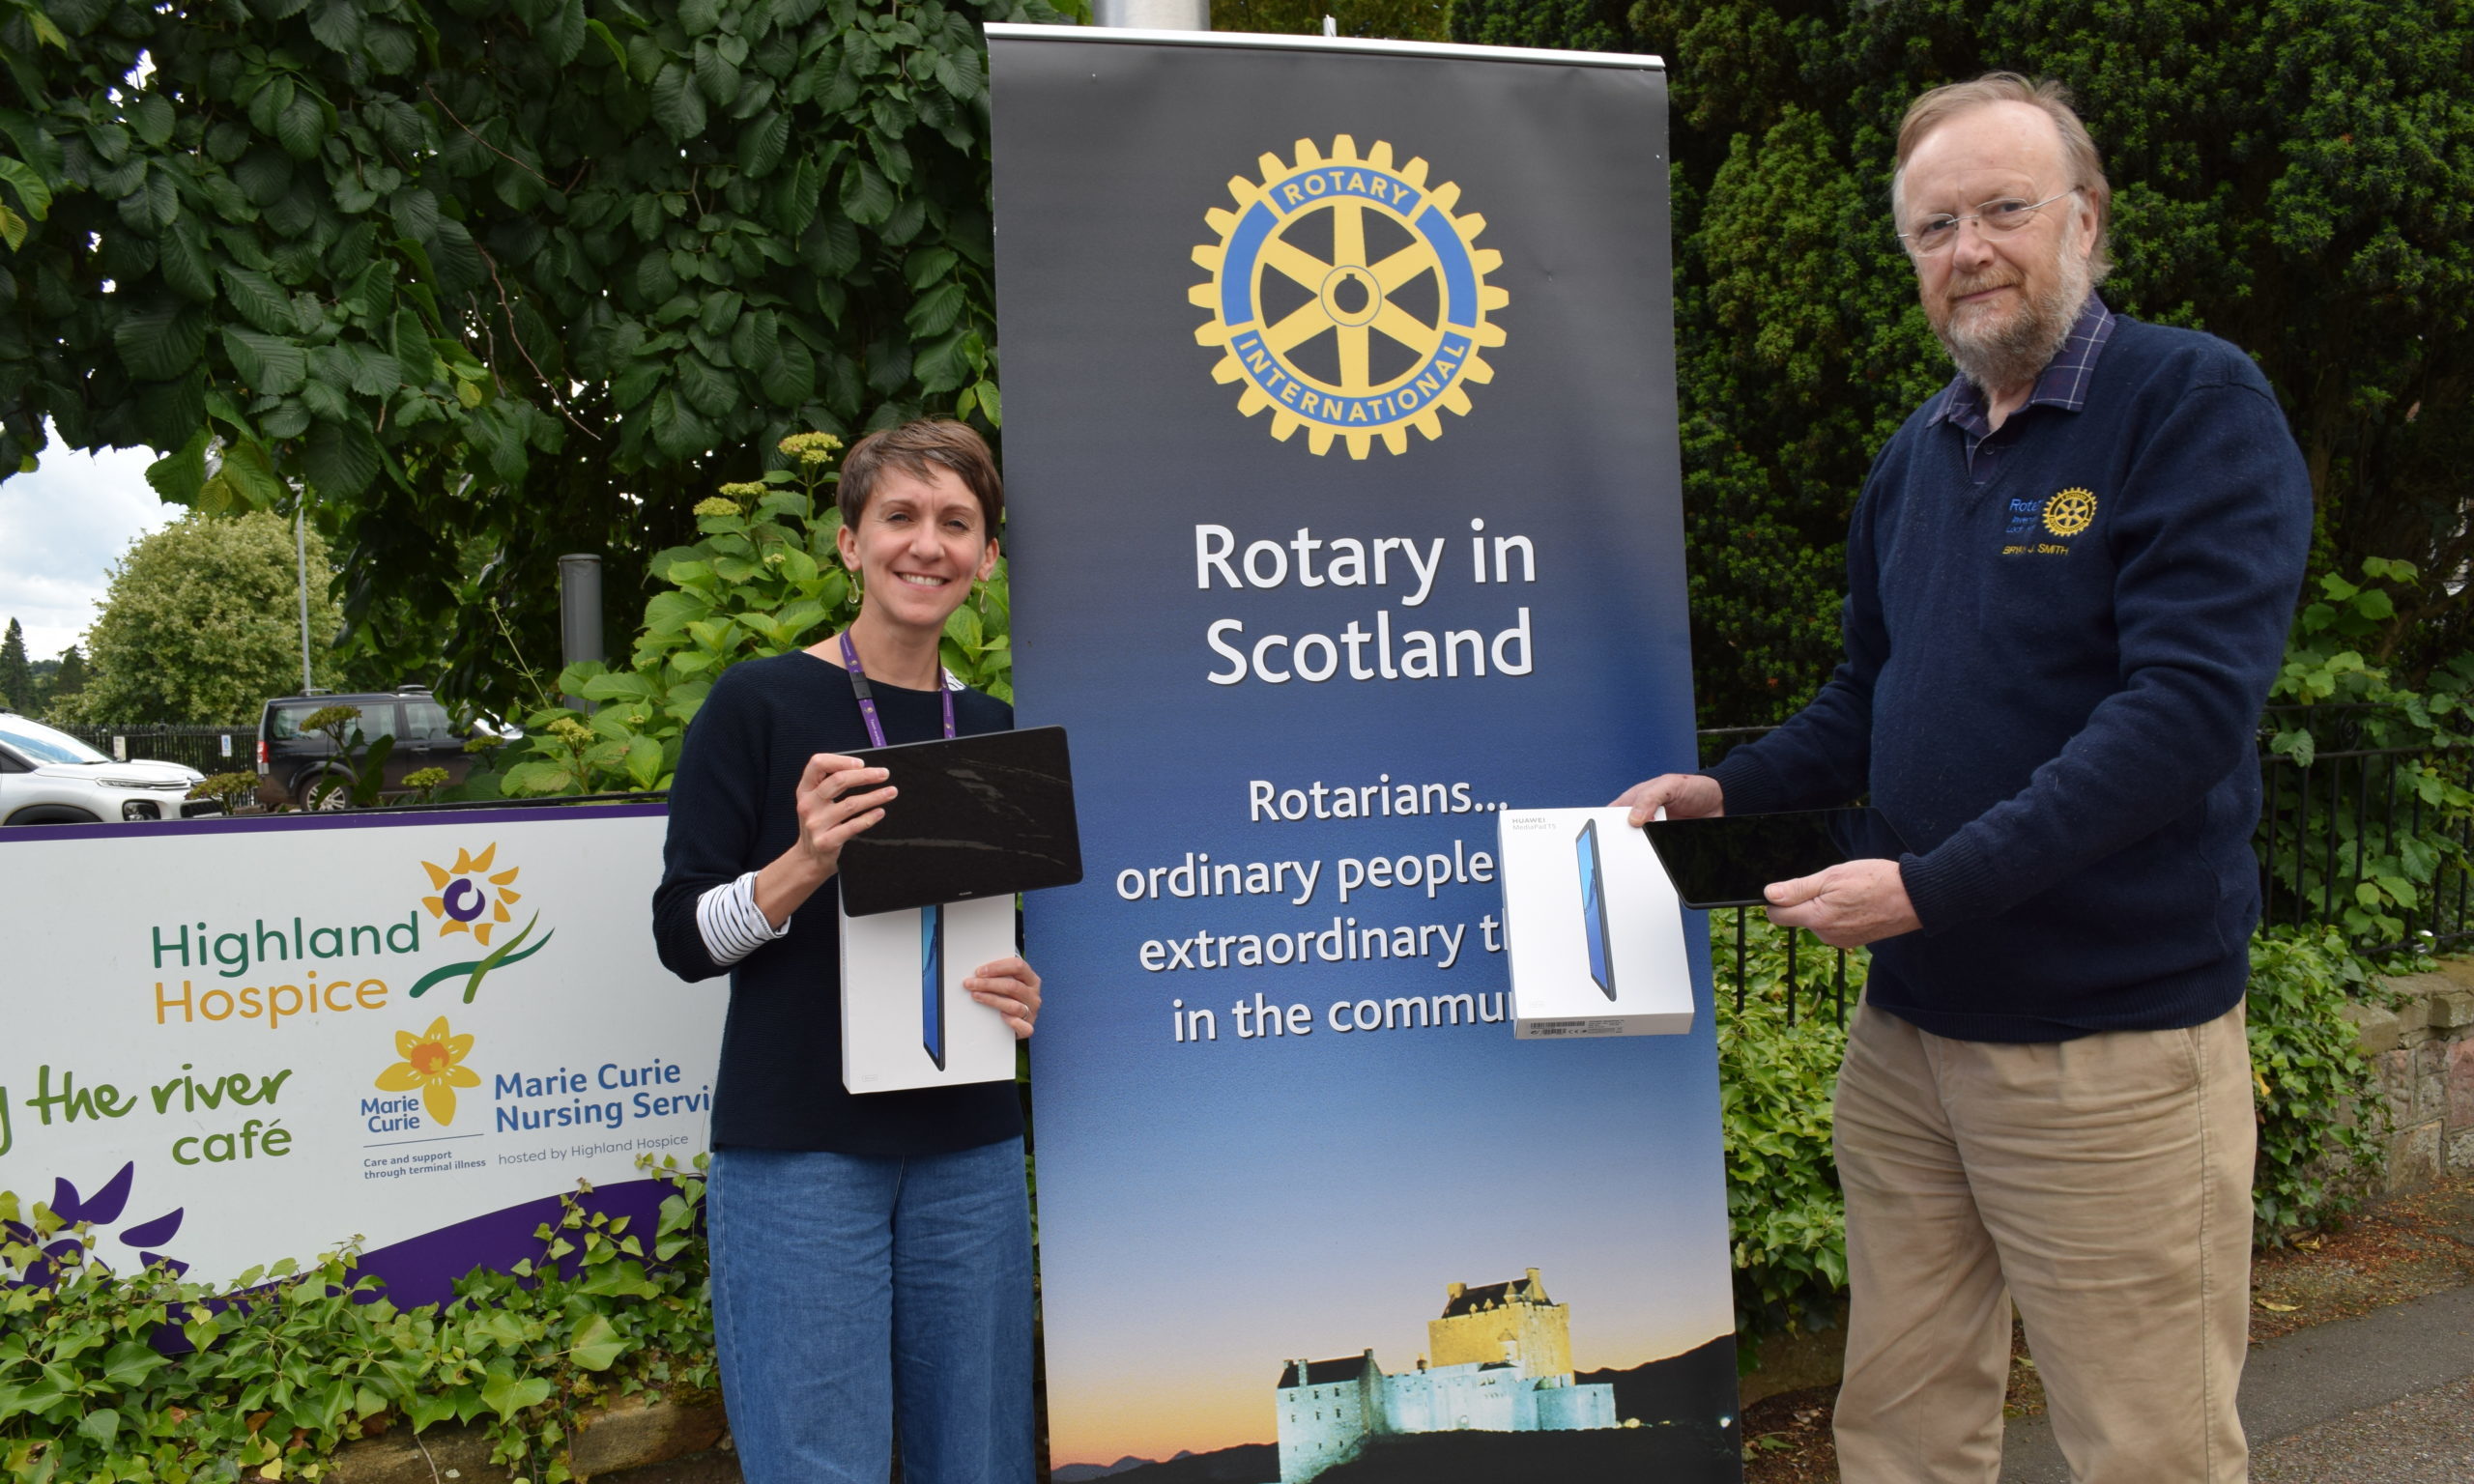 Jennie Devlin, of Highland Hospice, receiving the tablets from president of RCILN Bryan Smith